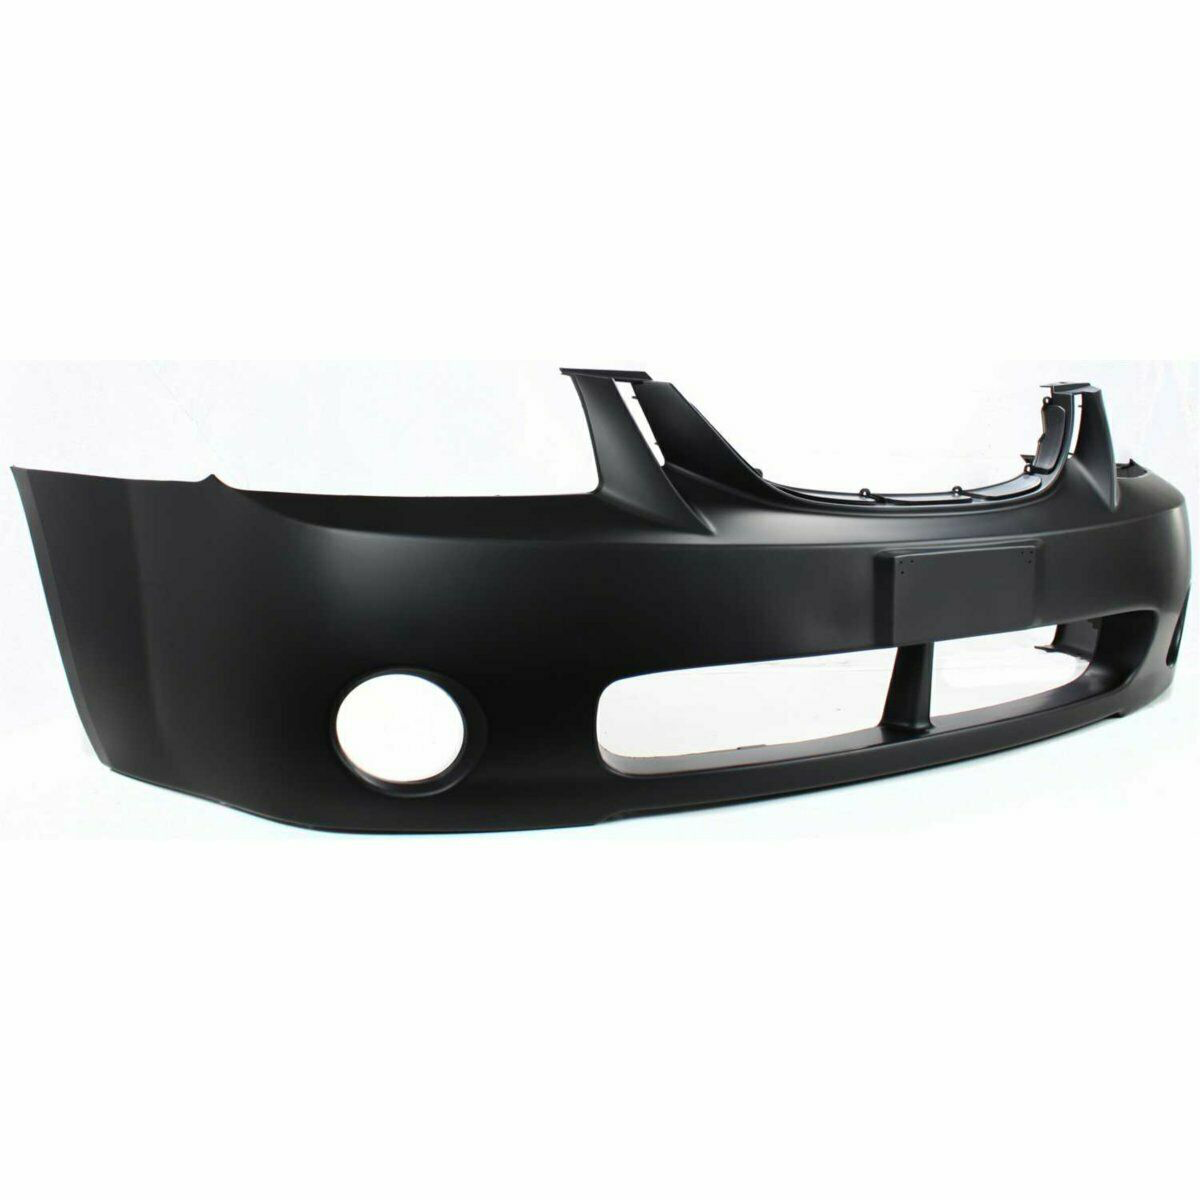 2004-2006 Kia Spectra Front Bumper Painted to Match